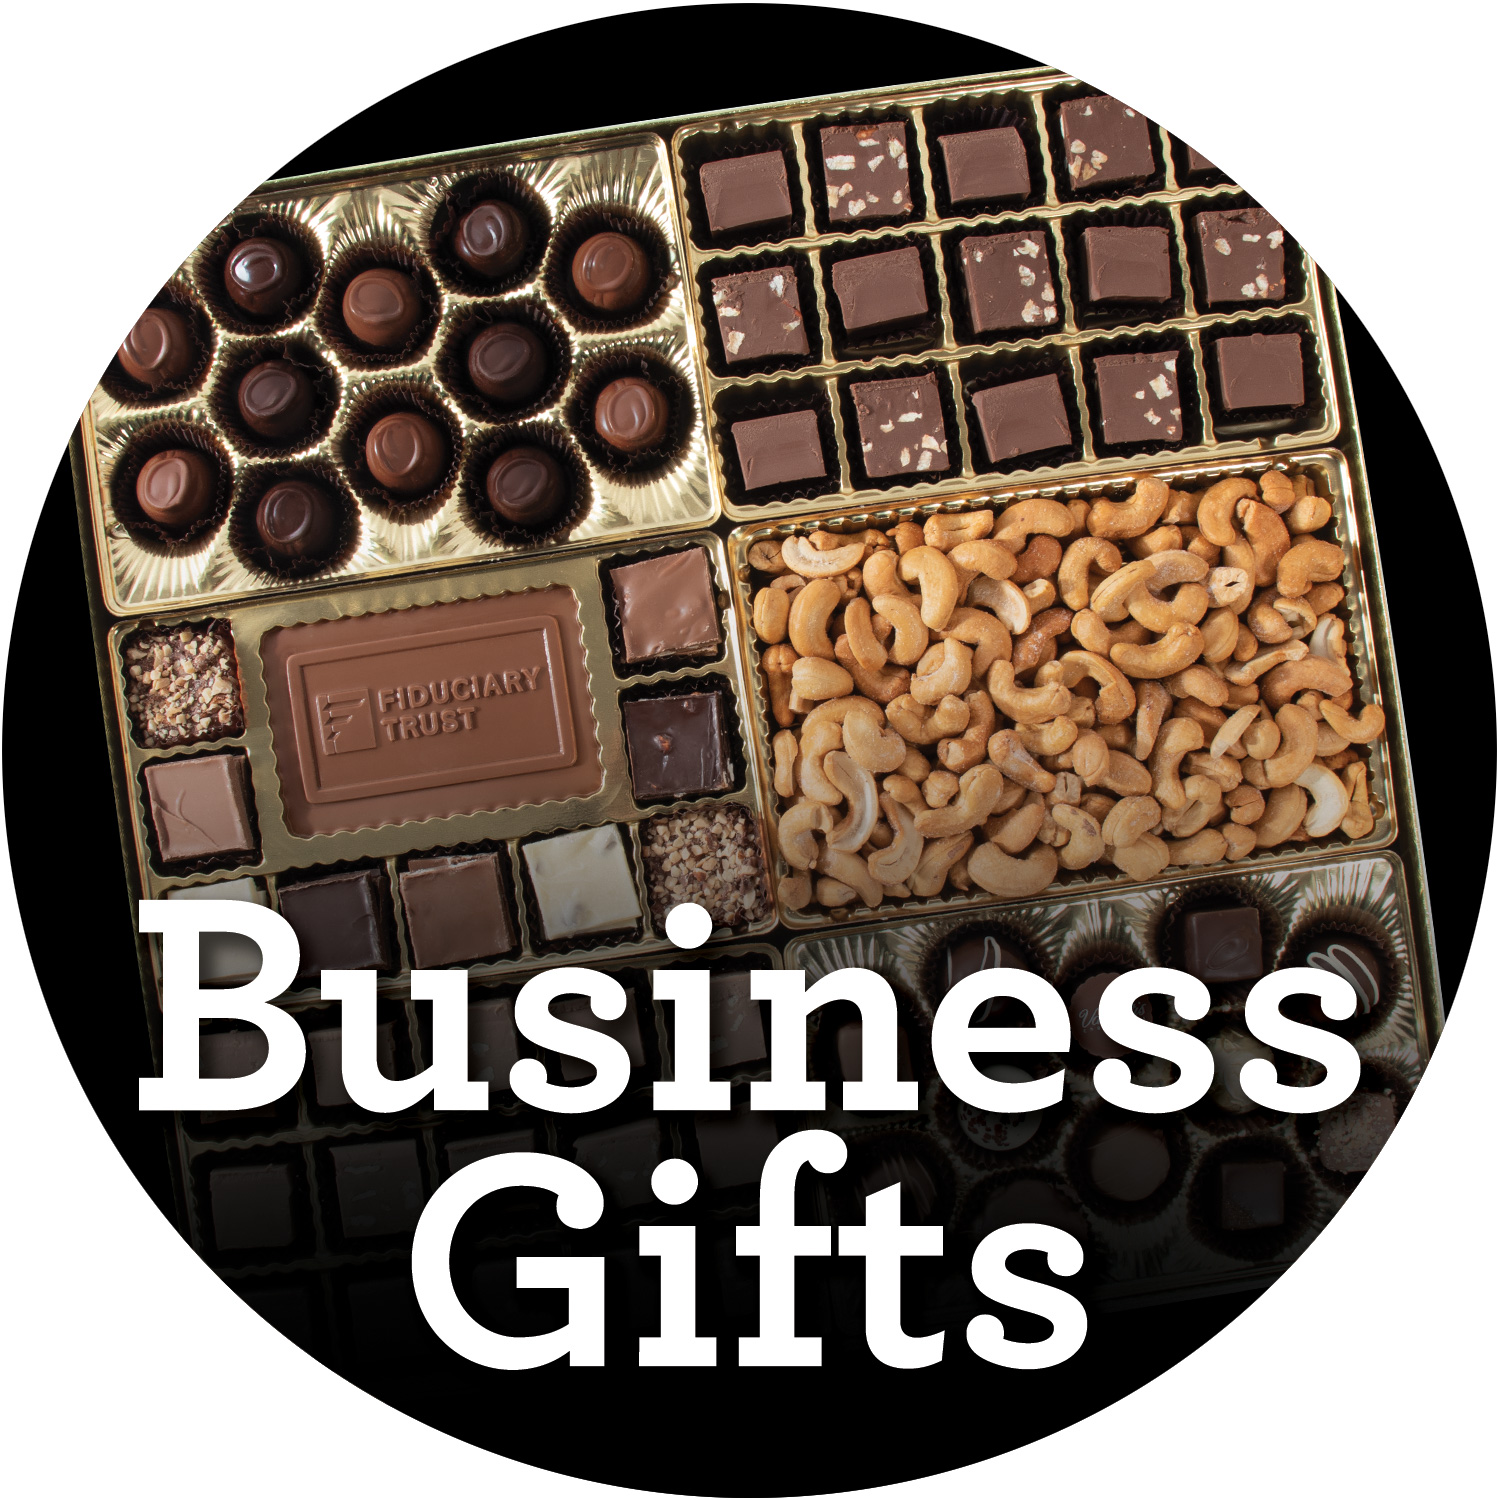 BUSINESS GIFTS